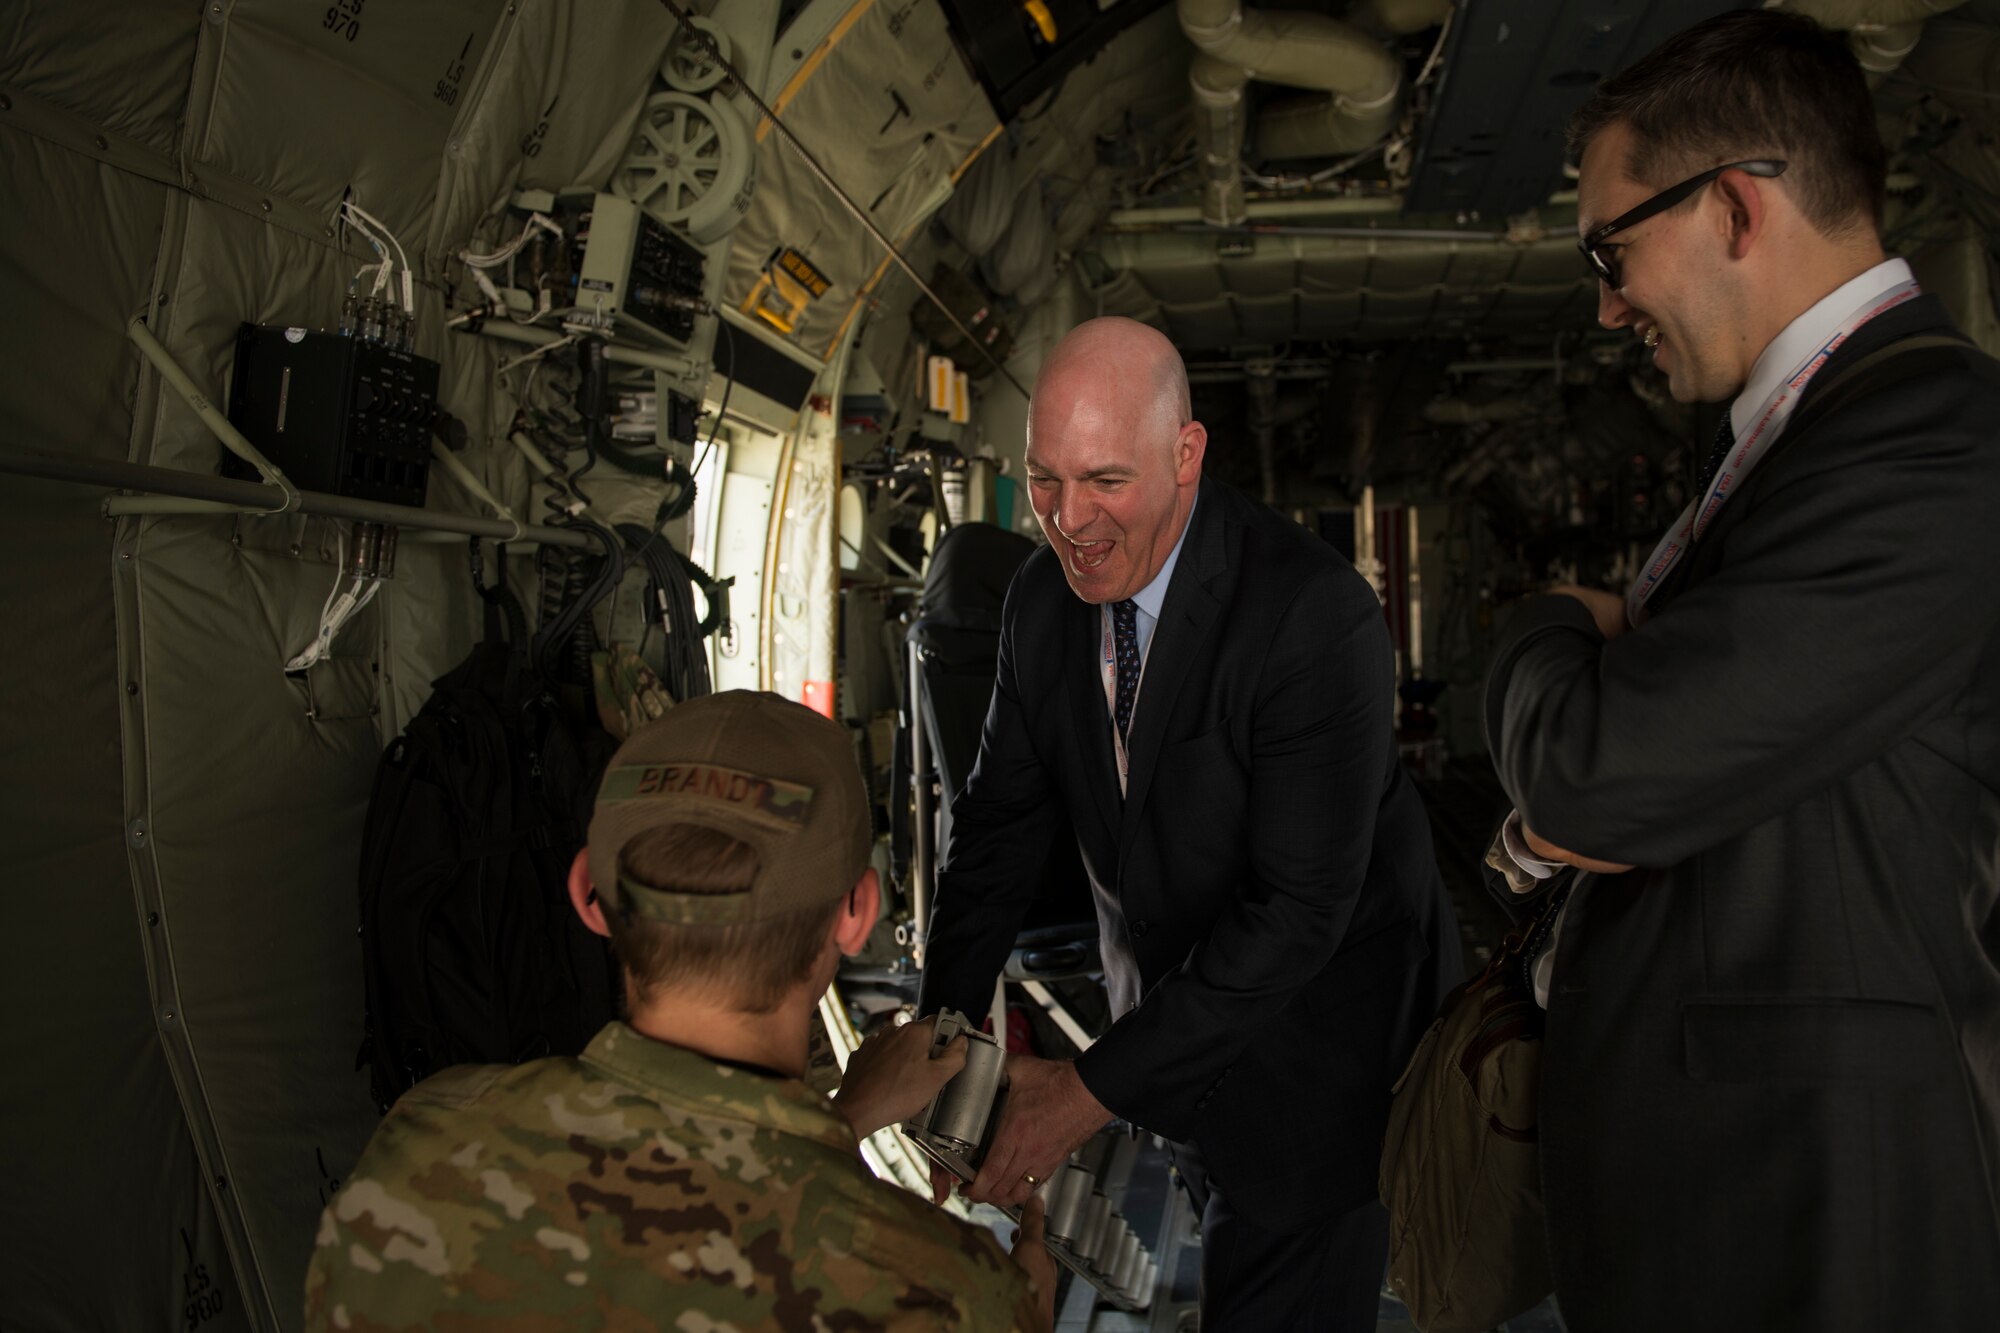 R. Clarke Cooper, right, Assistant Secretary of State for Political-Military Affairs, converses with U.S. Air Force Senior Airman Nolan Brandt, a loadmaster with the 774th Expeditionary Airlift Squadron, inside a C-130J Super Hercules at the Dubai Airshow, United Arab Emirates, Nov. 17, 2019.